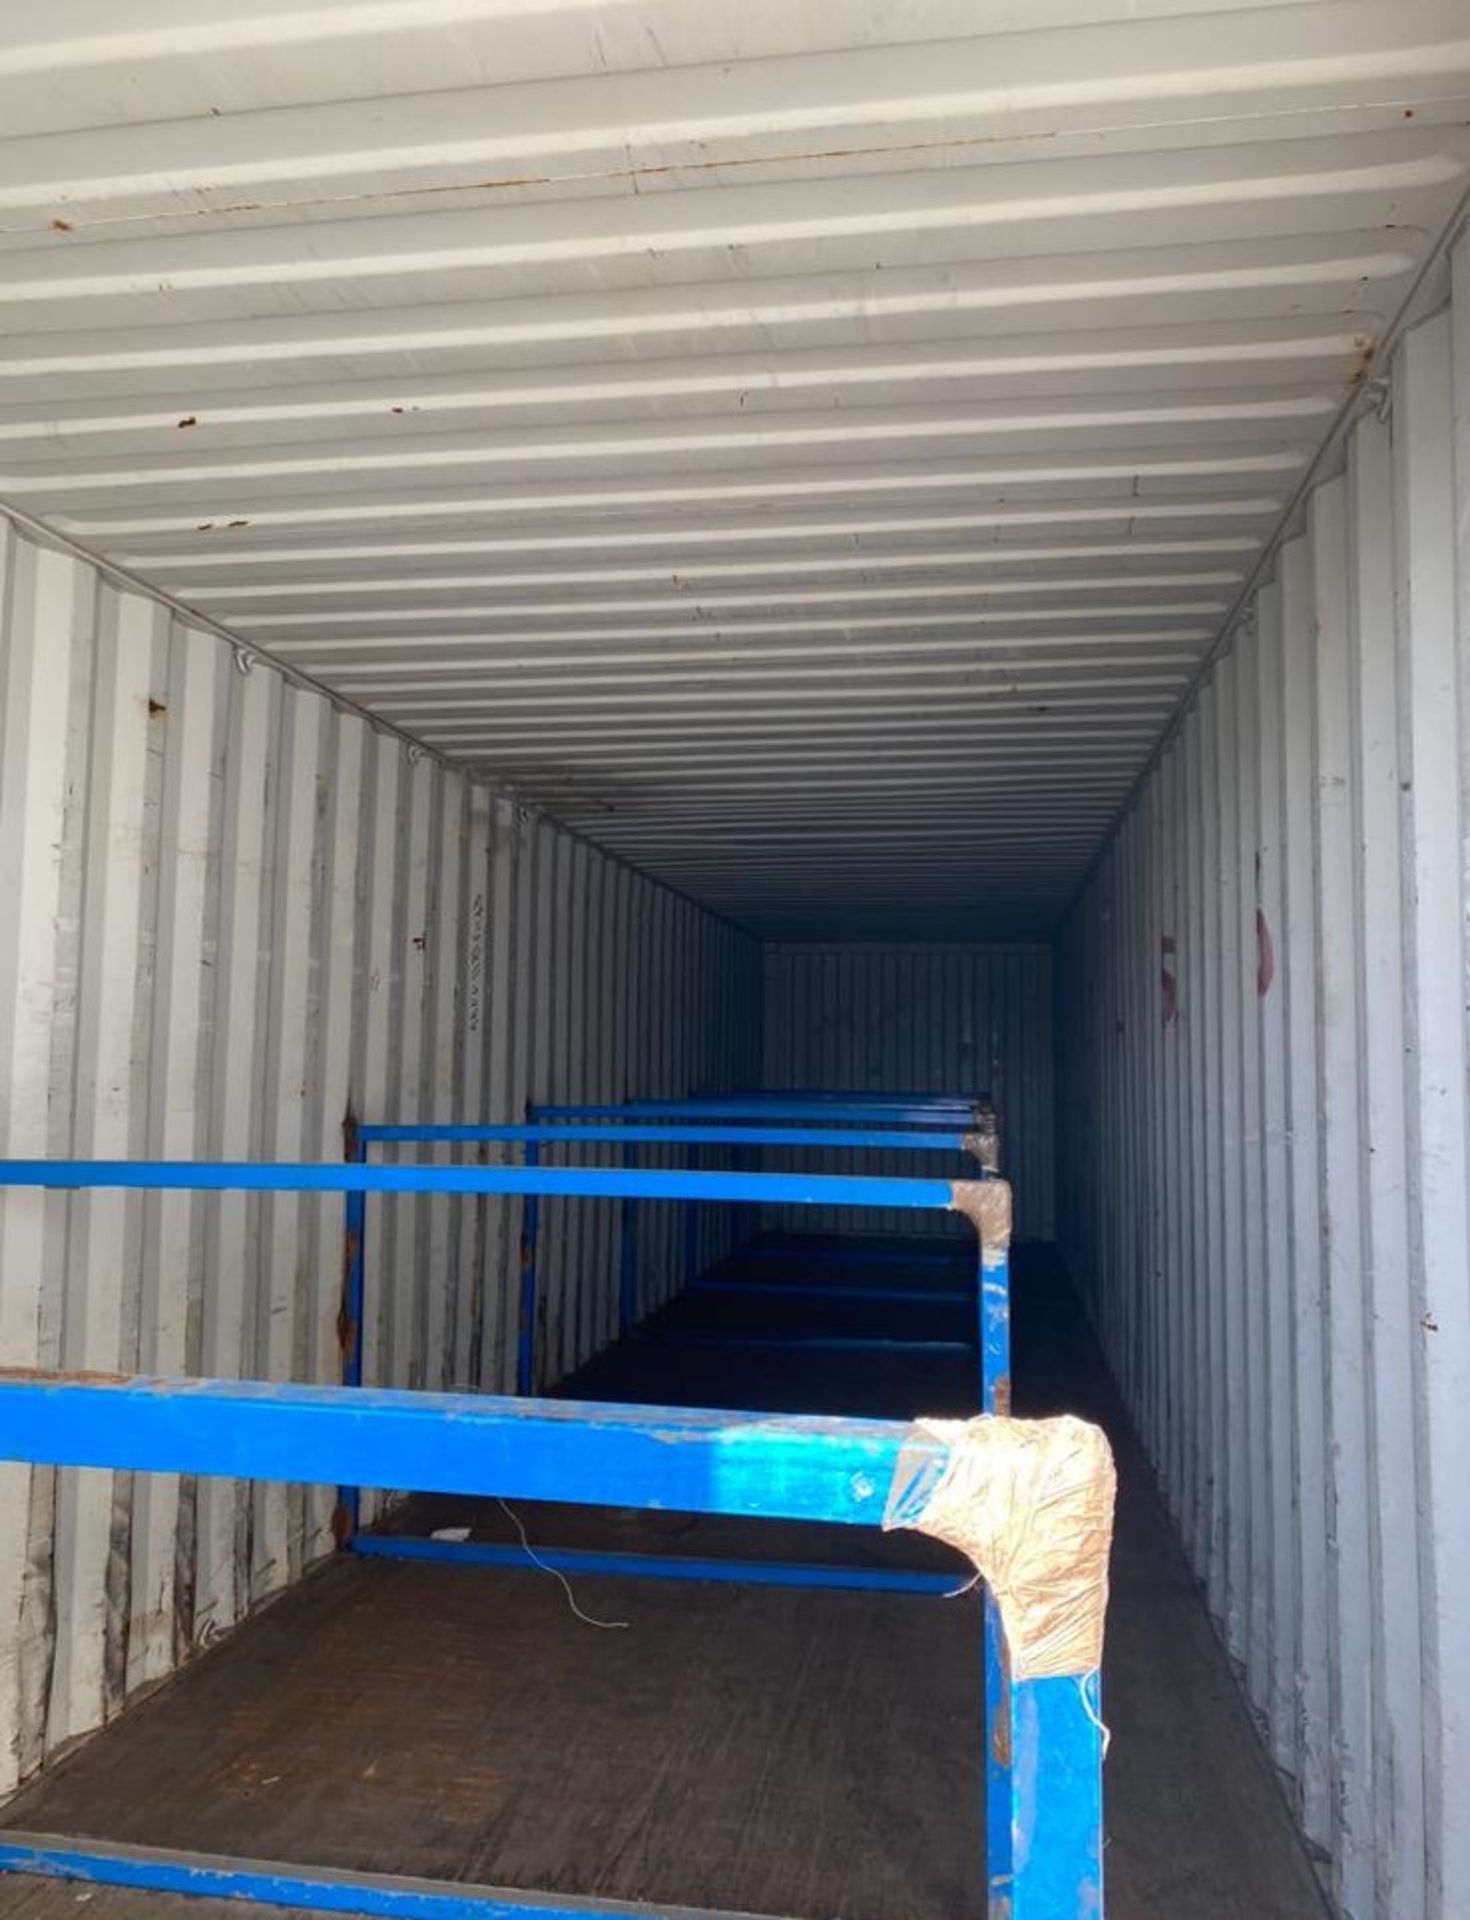 40ft x 8ft storage container shipping container - Image 6 of 7